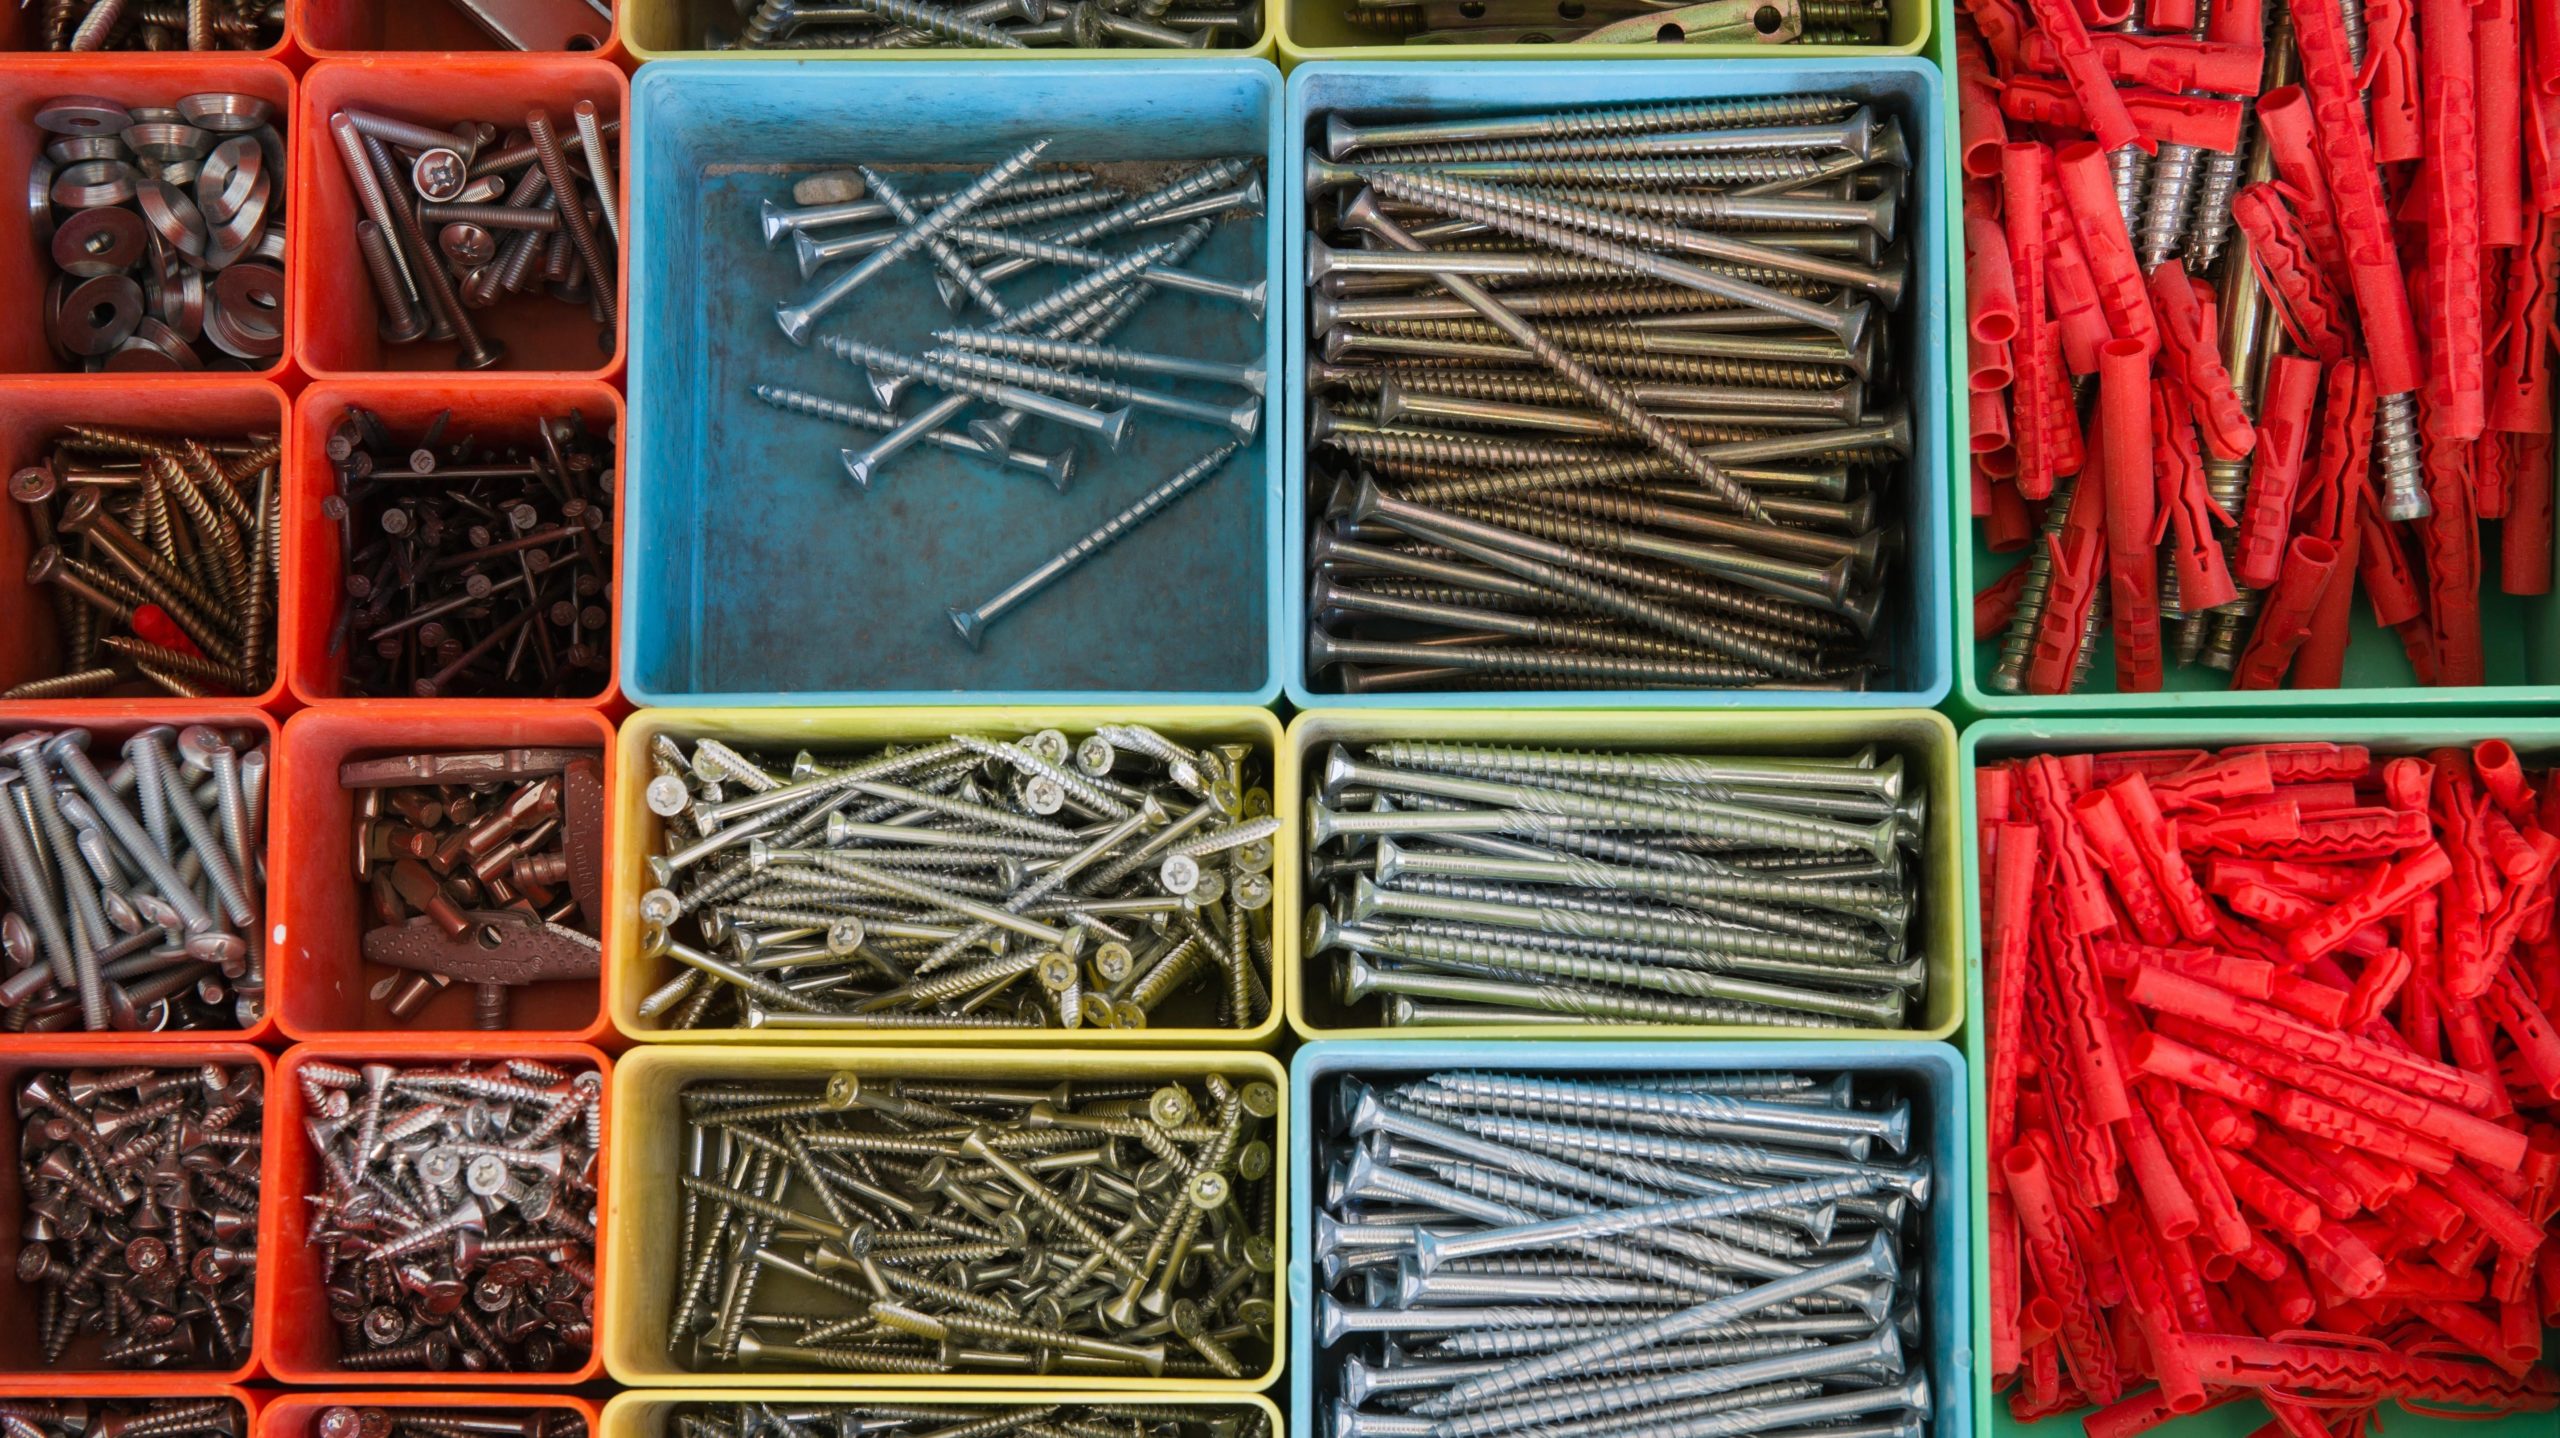 How to Choose the Best Screw or Nail for Any Project